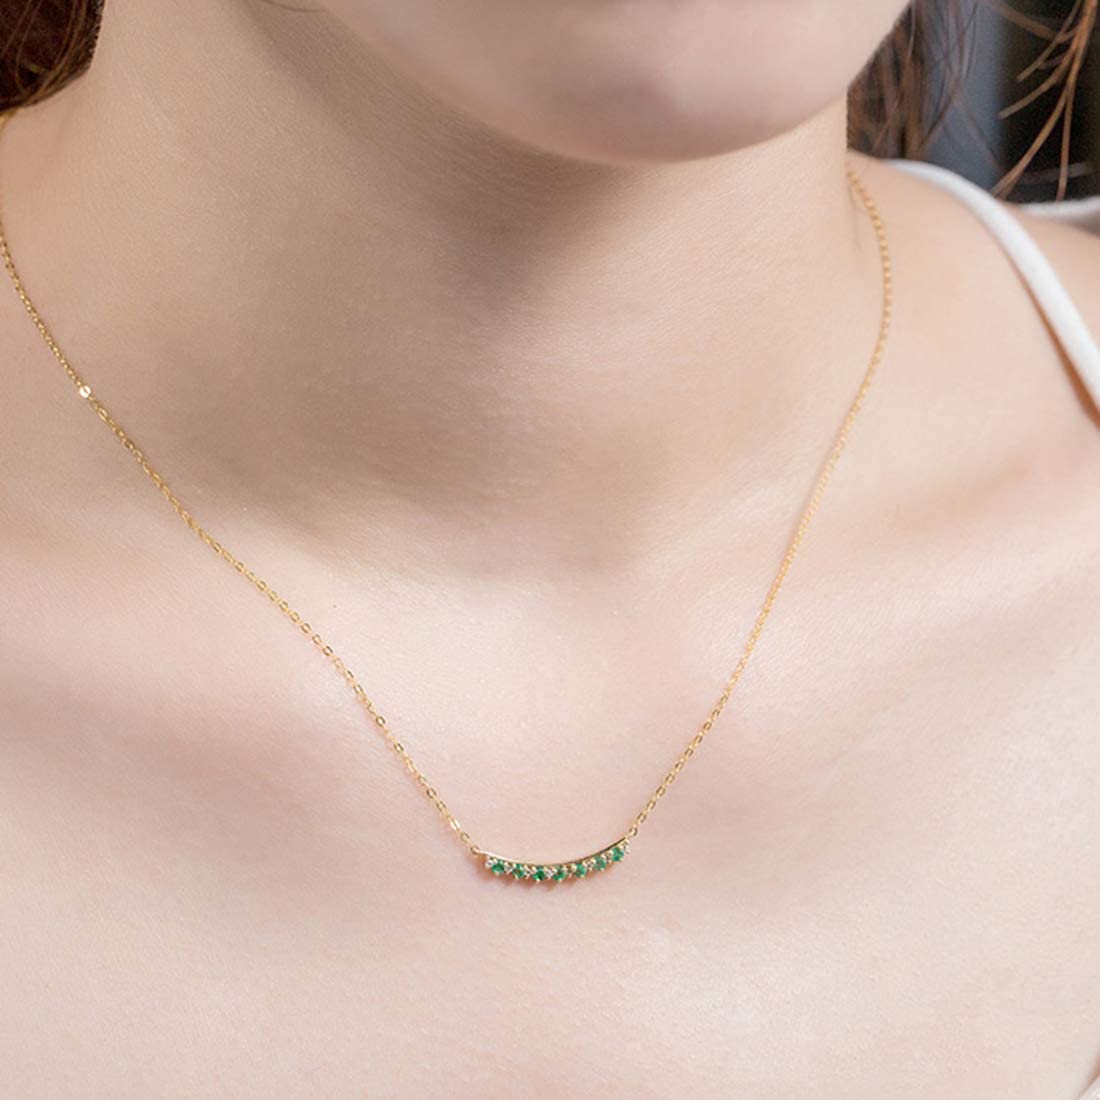 FANCIME "Mademoiselle Green" Green Emerald Smile 14K Yellow Gold Necklace Show